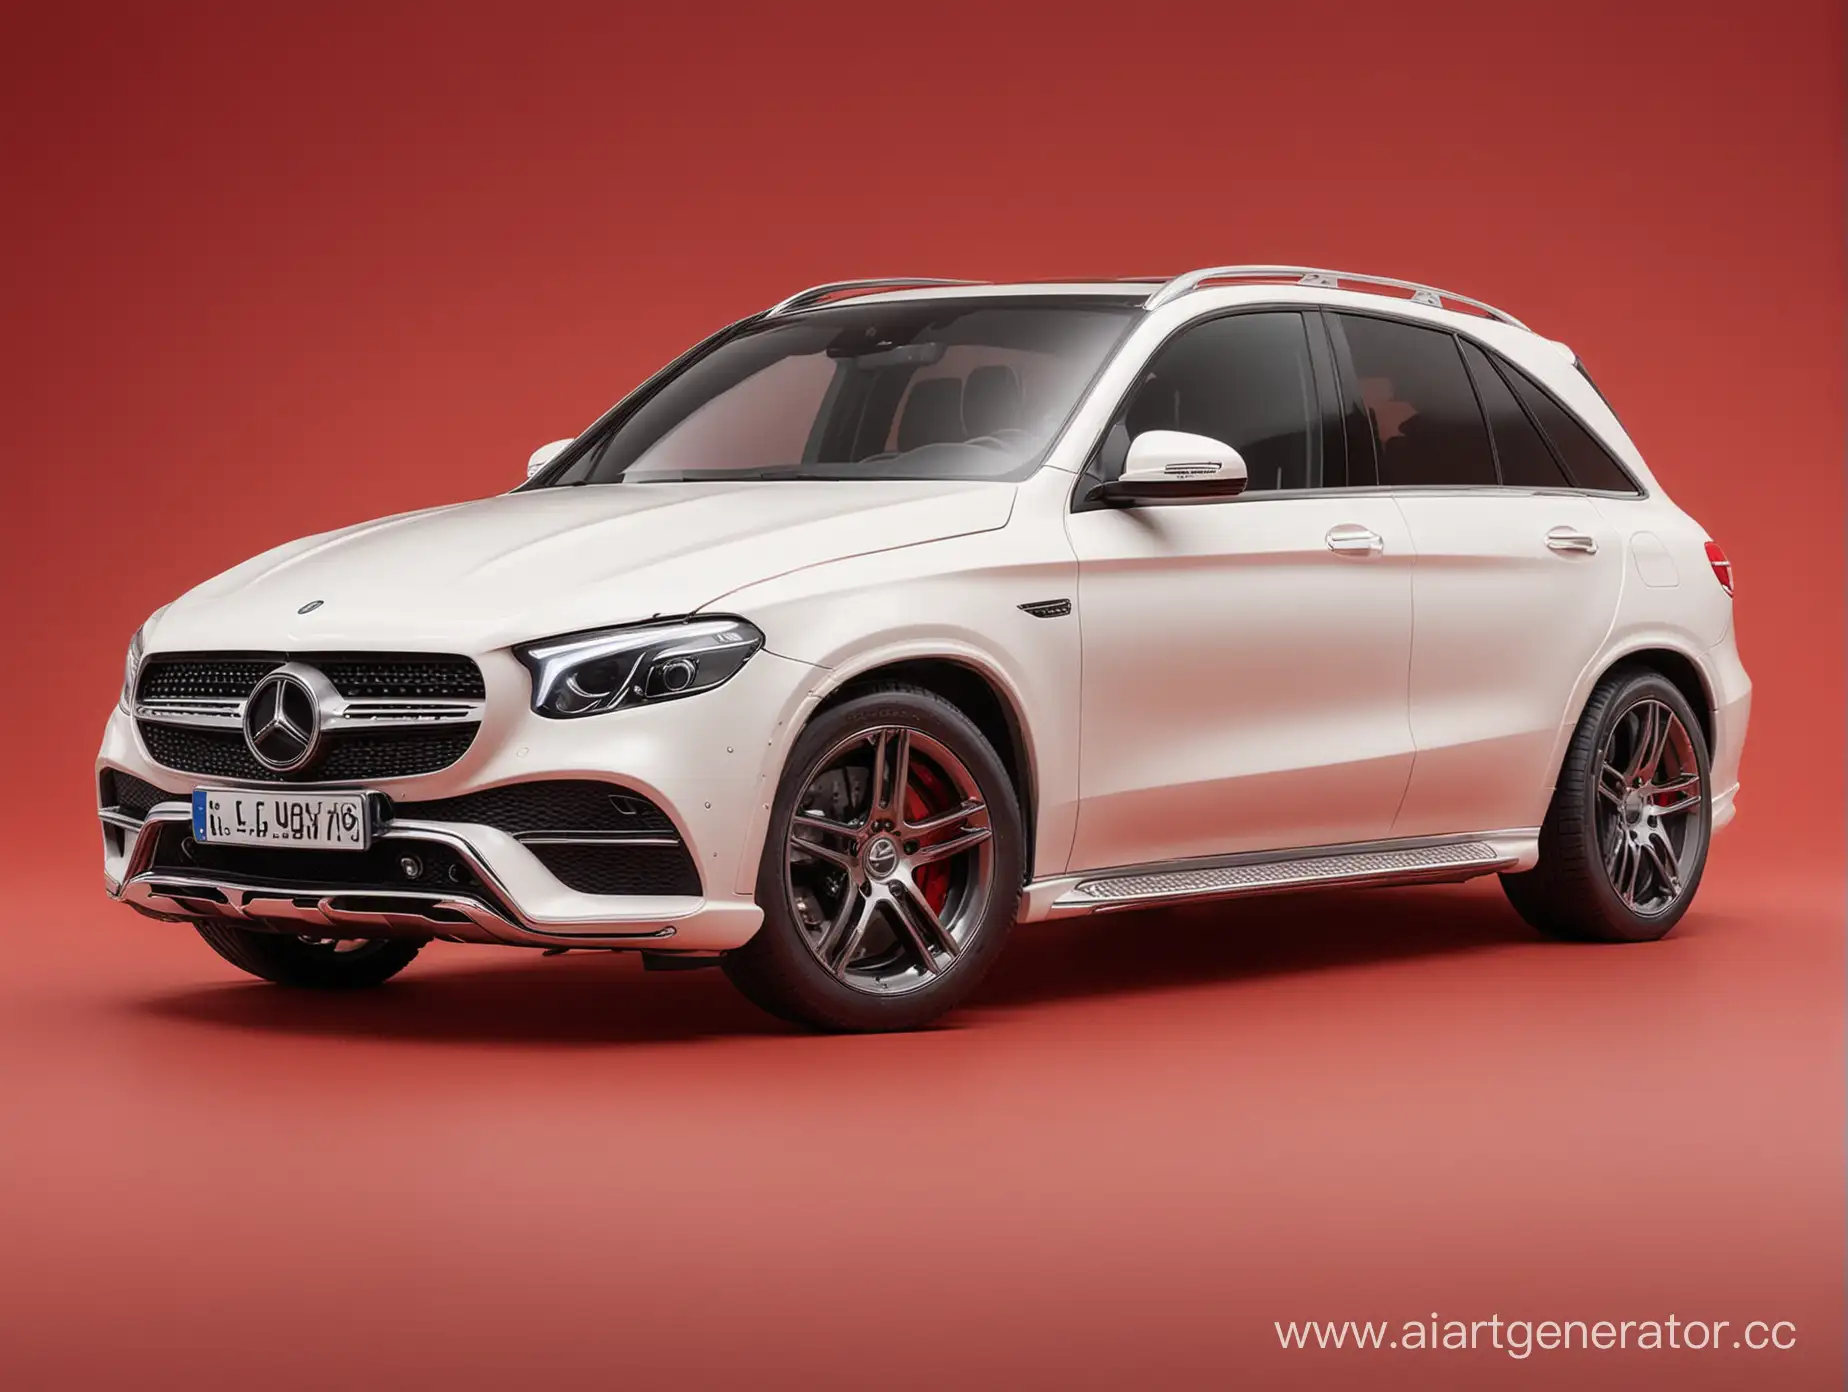 Luxury-White-Mercedes-Car-on-Vibrant-Red-Background